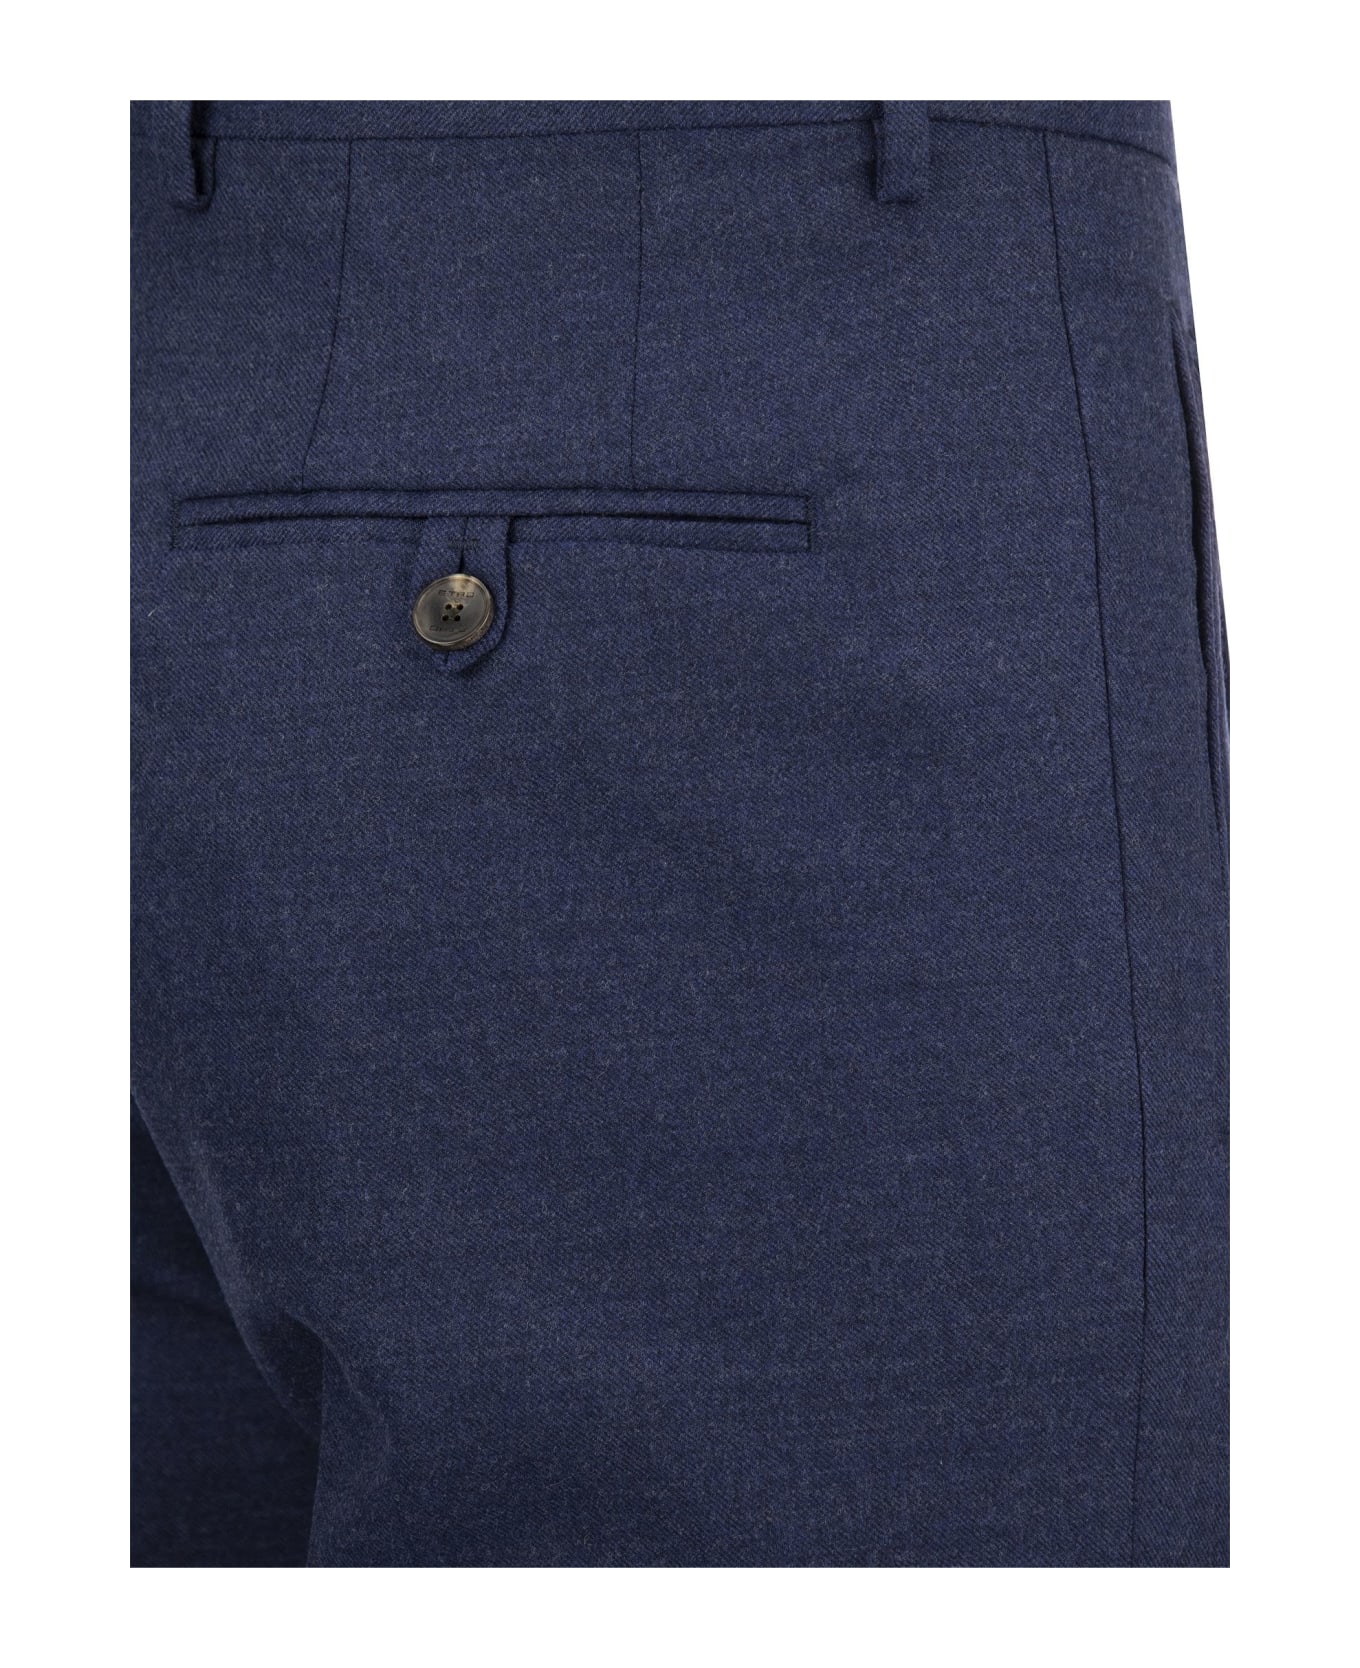 Etro Trousers With Dart - Blue ボトムス